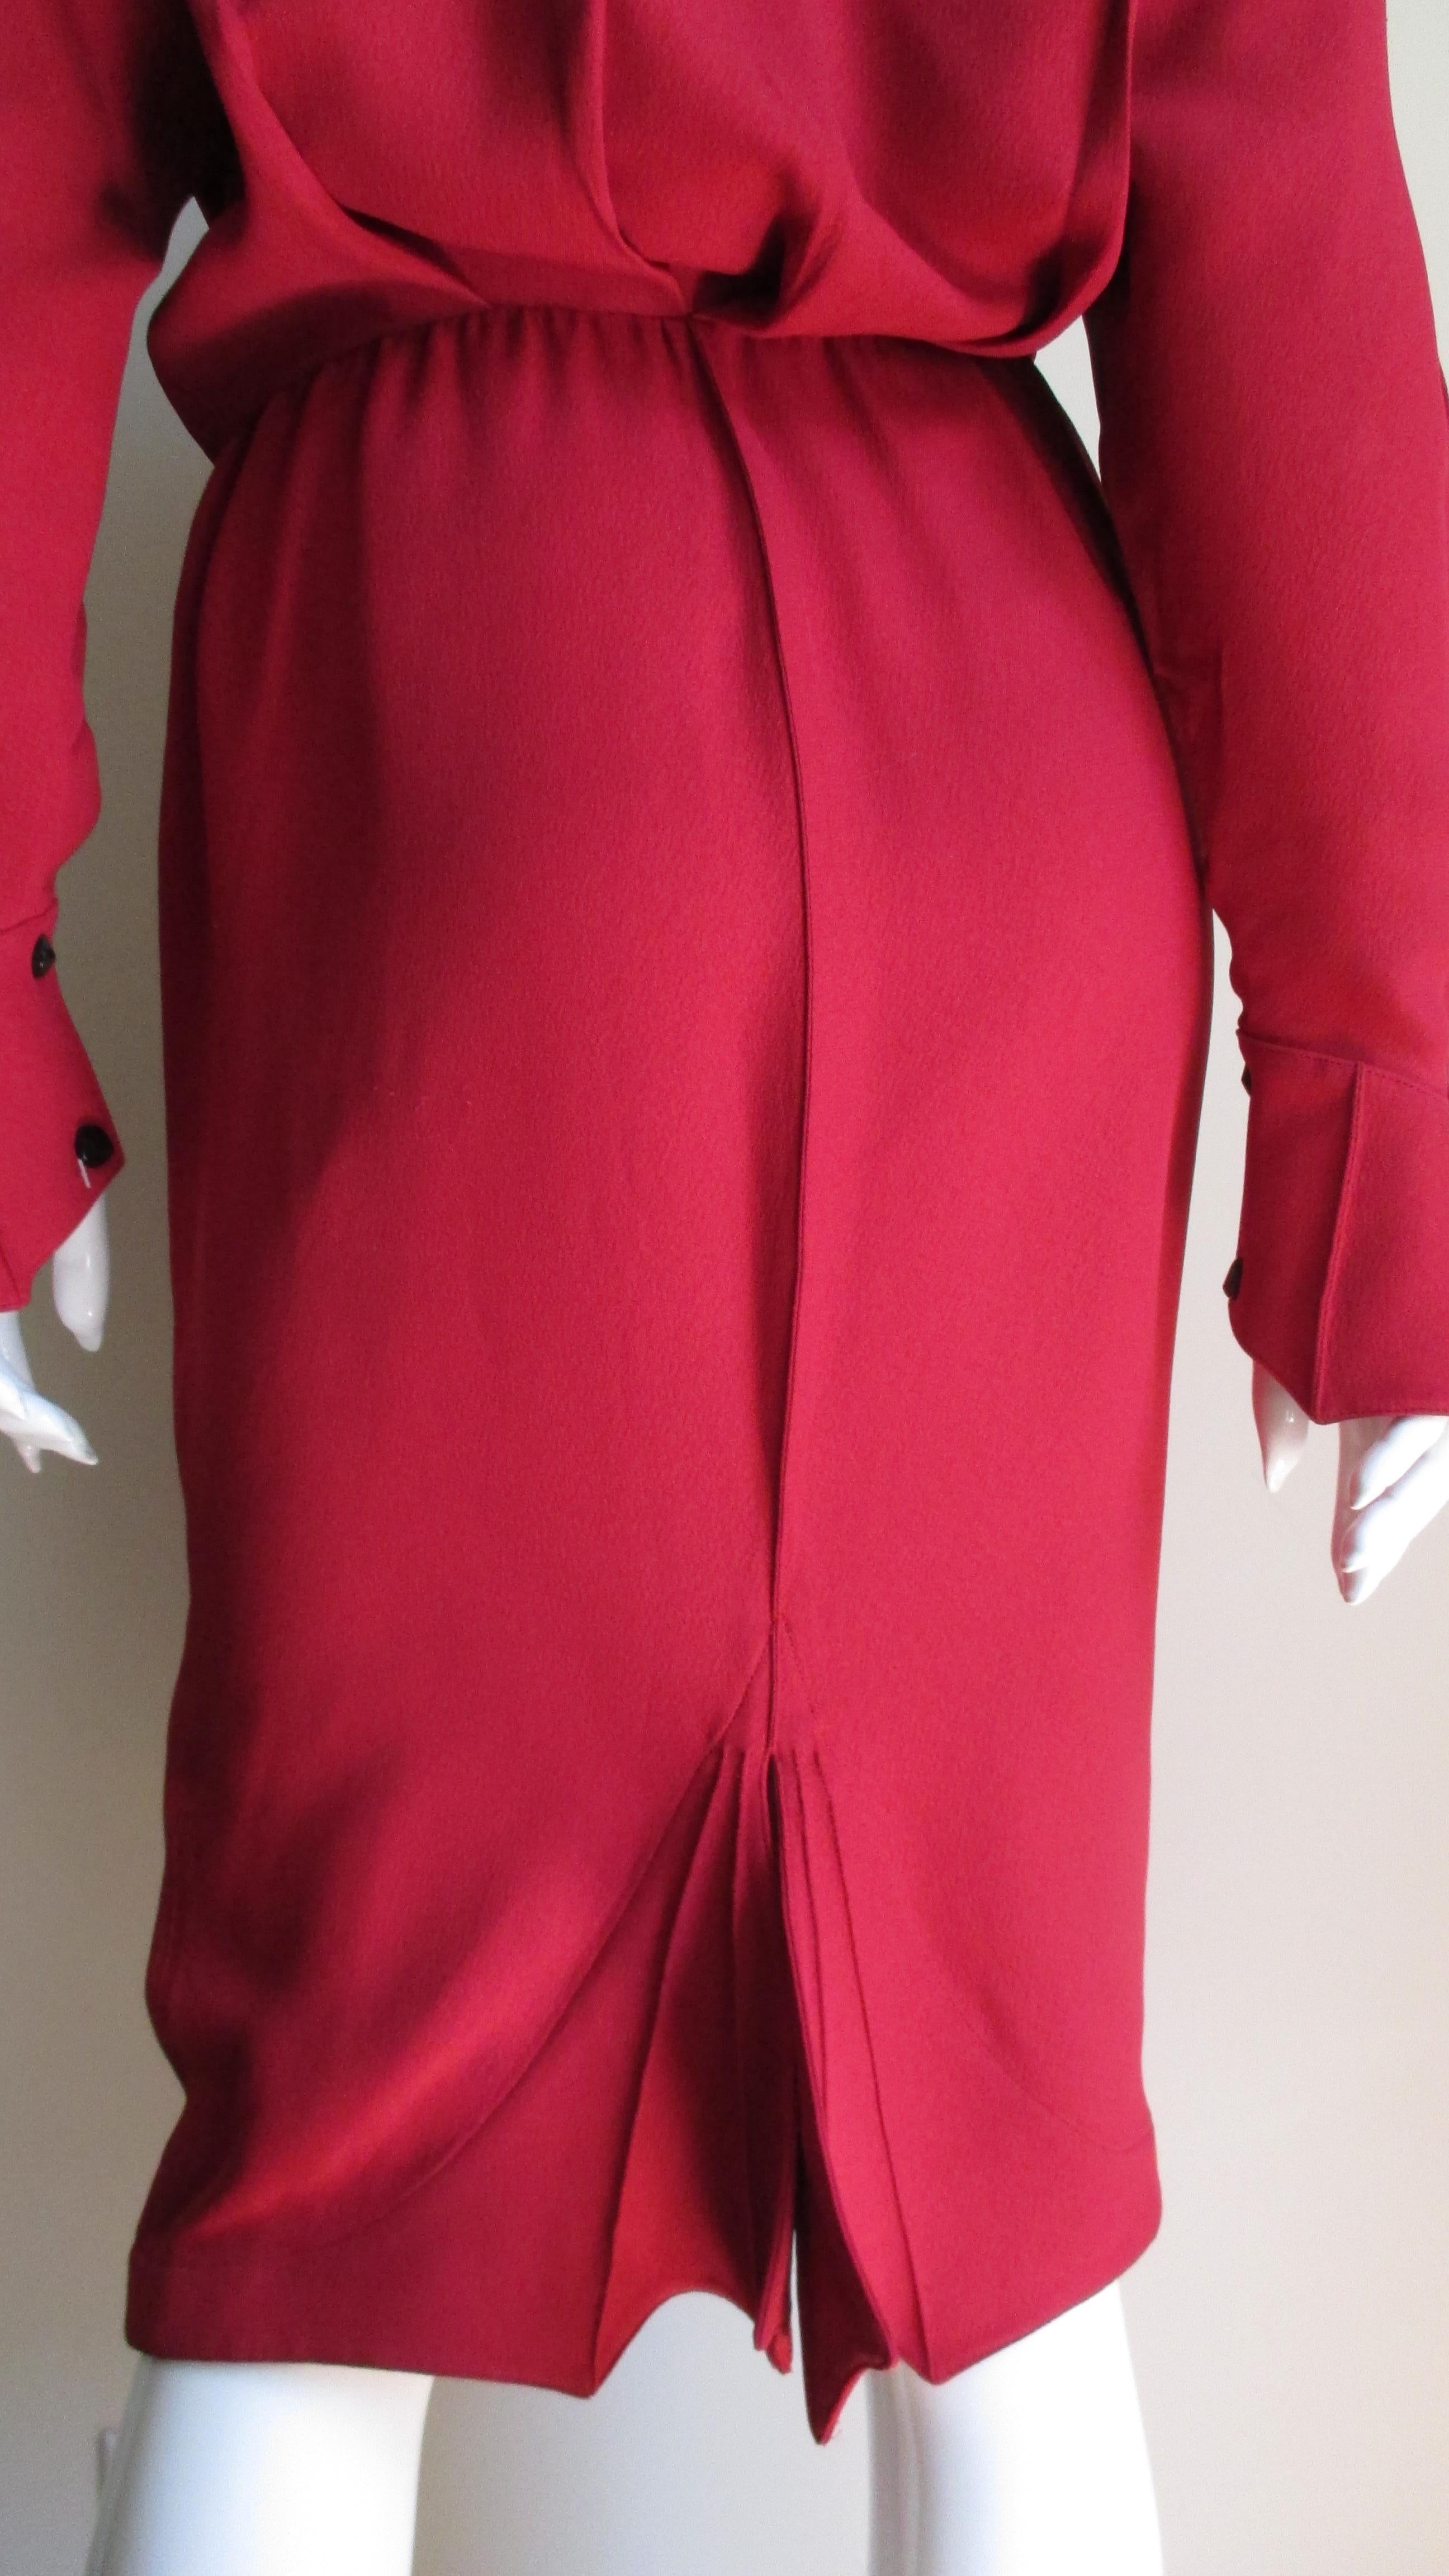 Thierry Mugler Dress with Pointed Collar and Cuffs 1980s For Sale 8